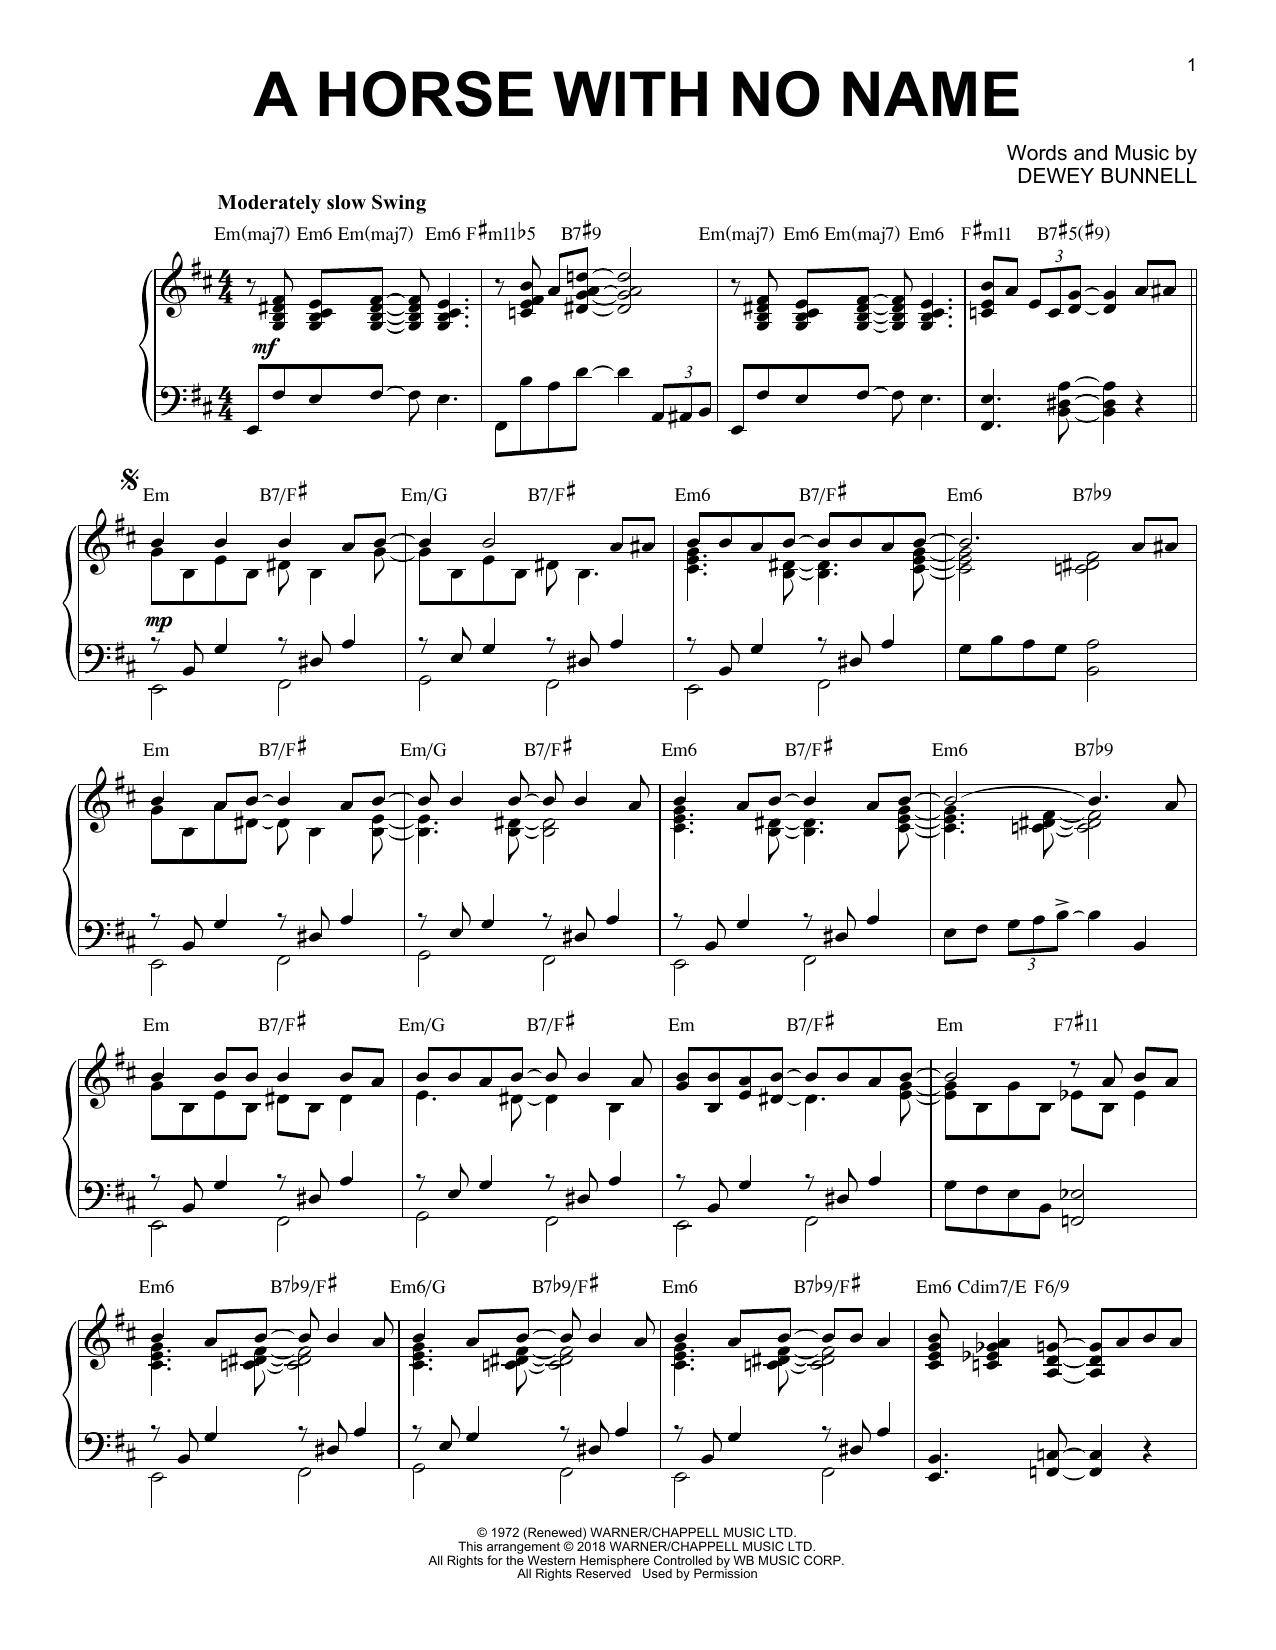 Download America A Horse With No Name [Jazz version] Sheet Music